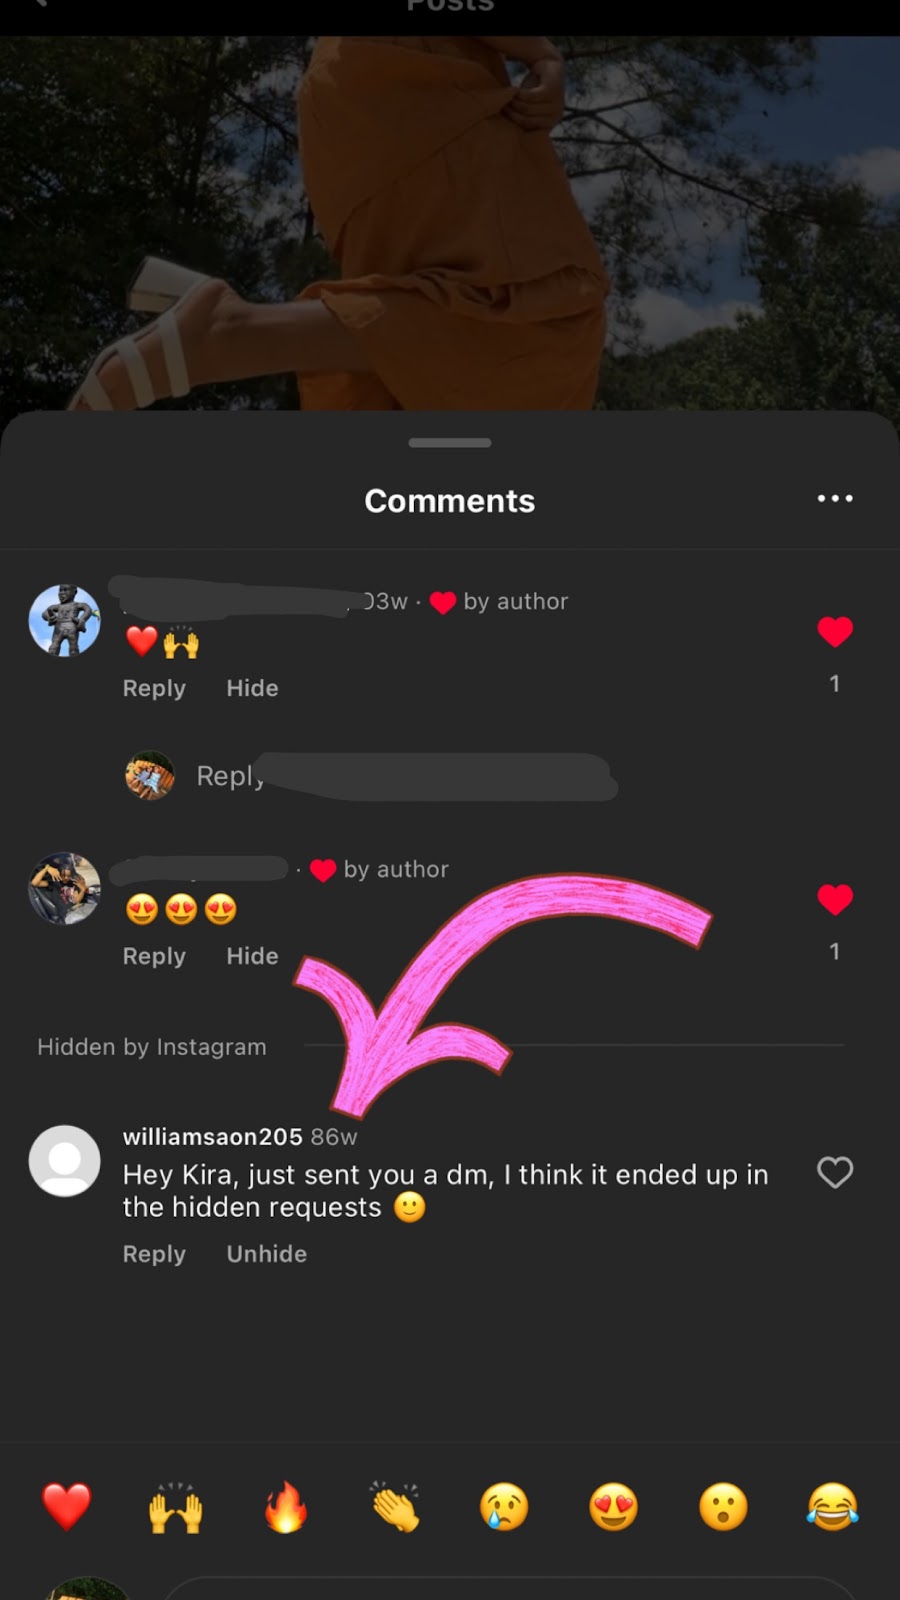 Screenshot of Instagram comments featuring a comment from a bot reading: Hey Kira, just sent you a dm, I think it ended up in hidden requests :)